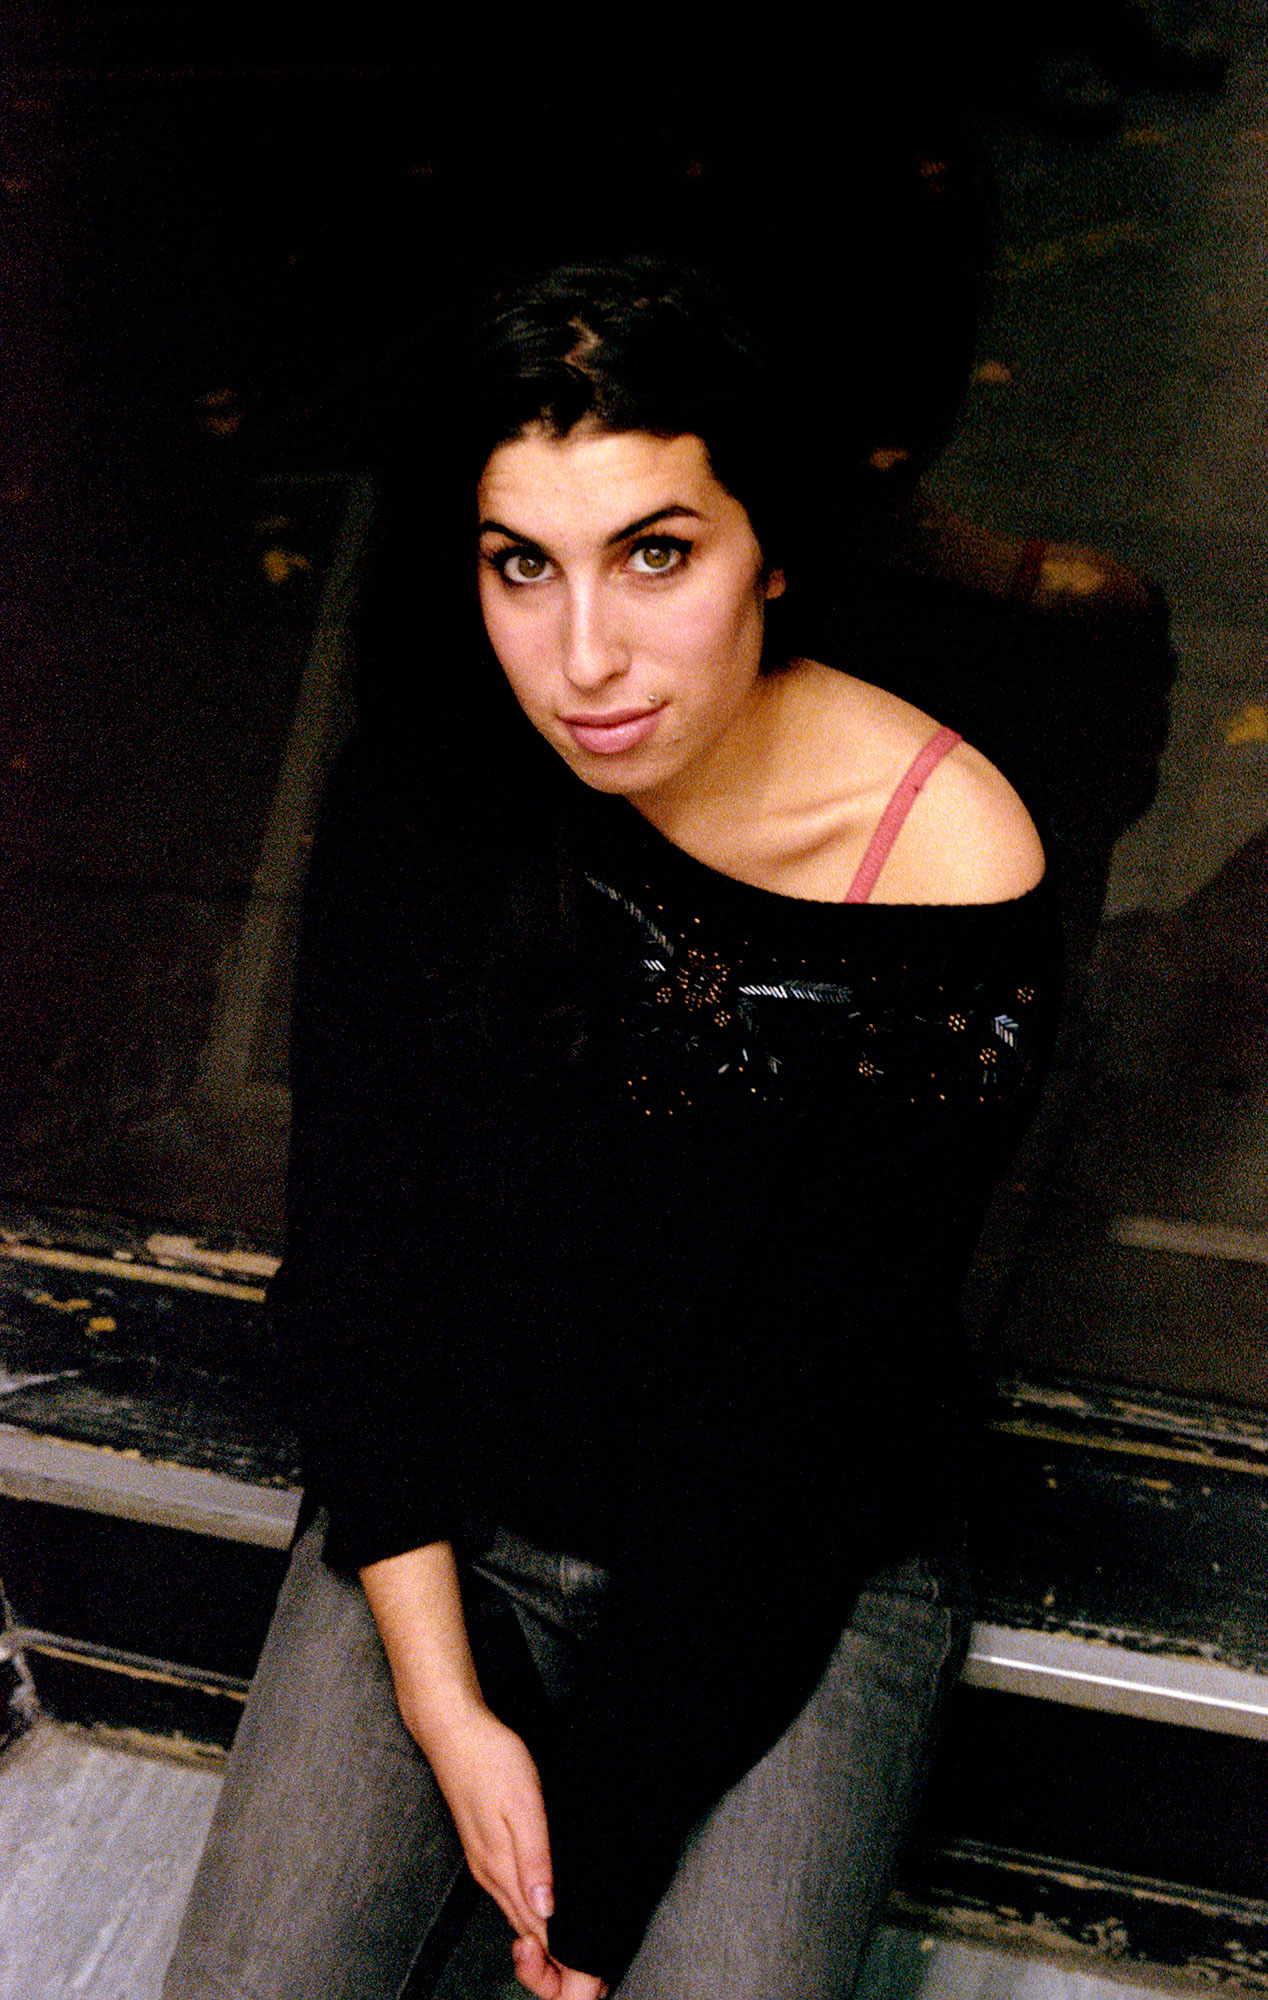 Remembering Amy Winehouse: Grammy Winner's Life in Photos